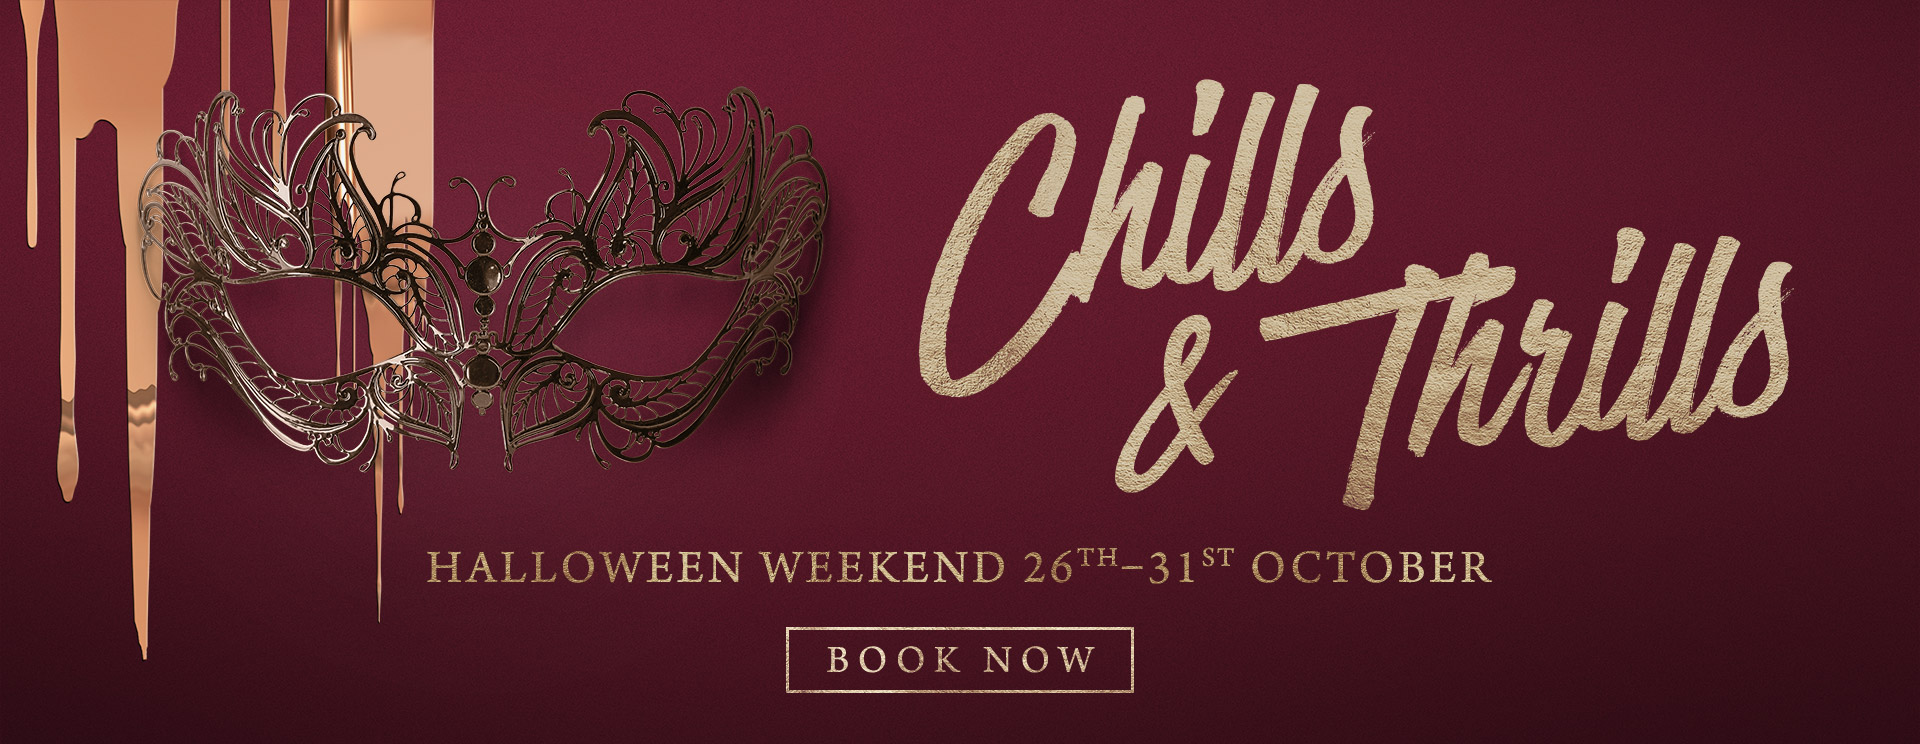 Chills & Thrills this Halloween at The Fishery Inn